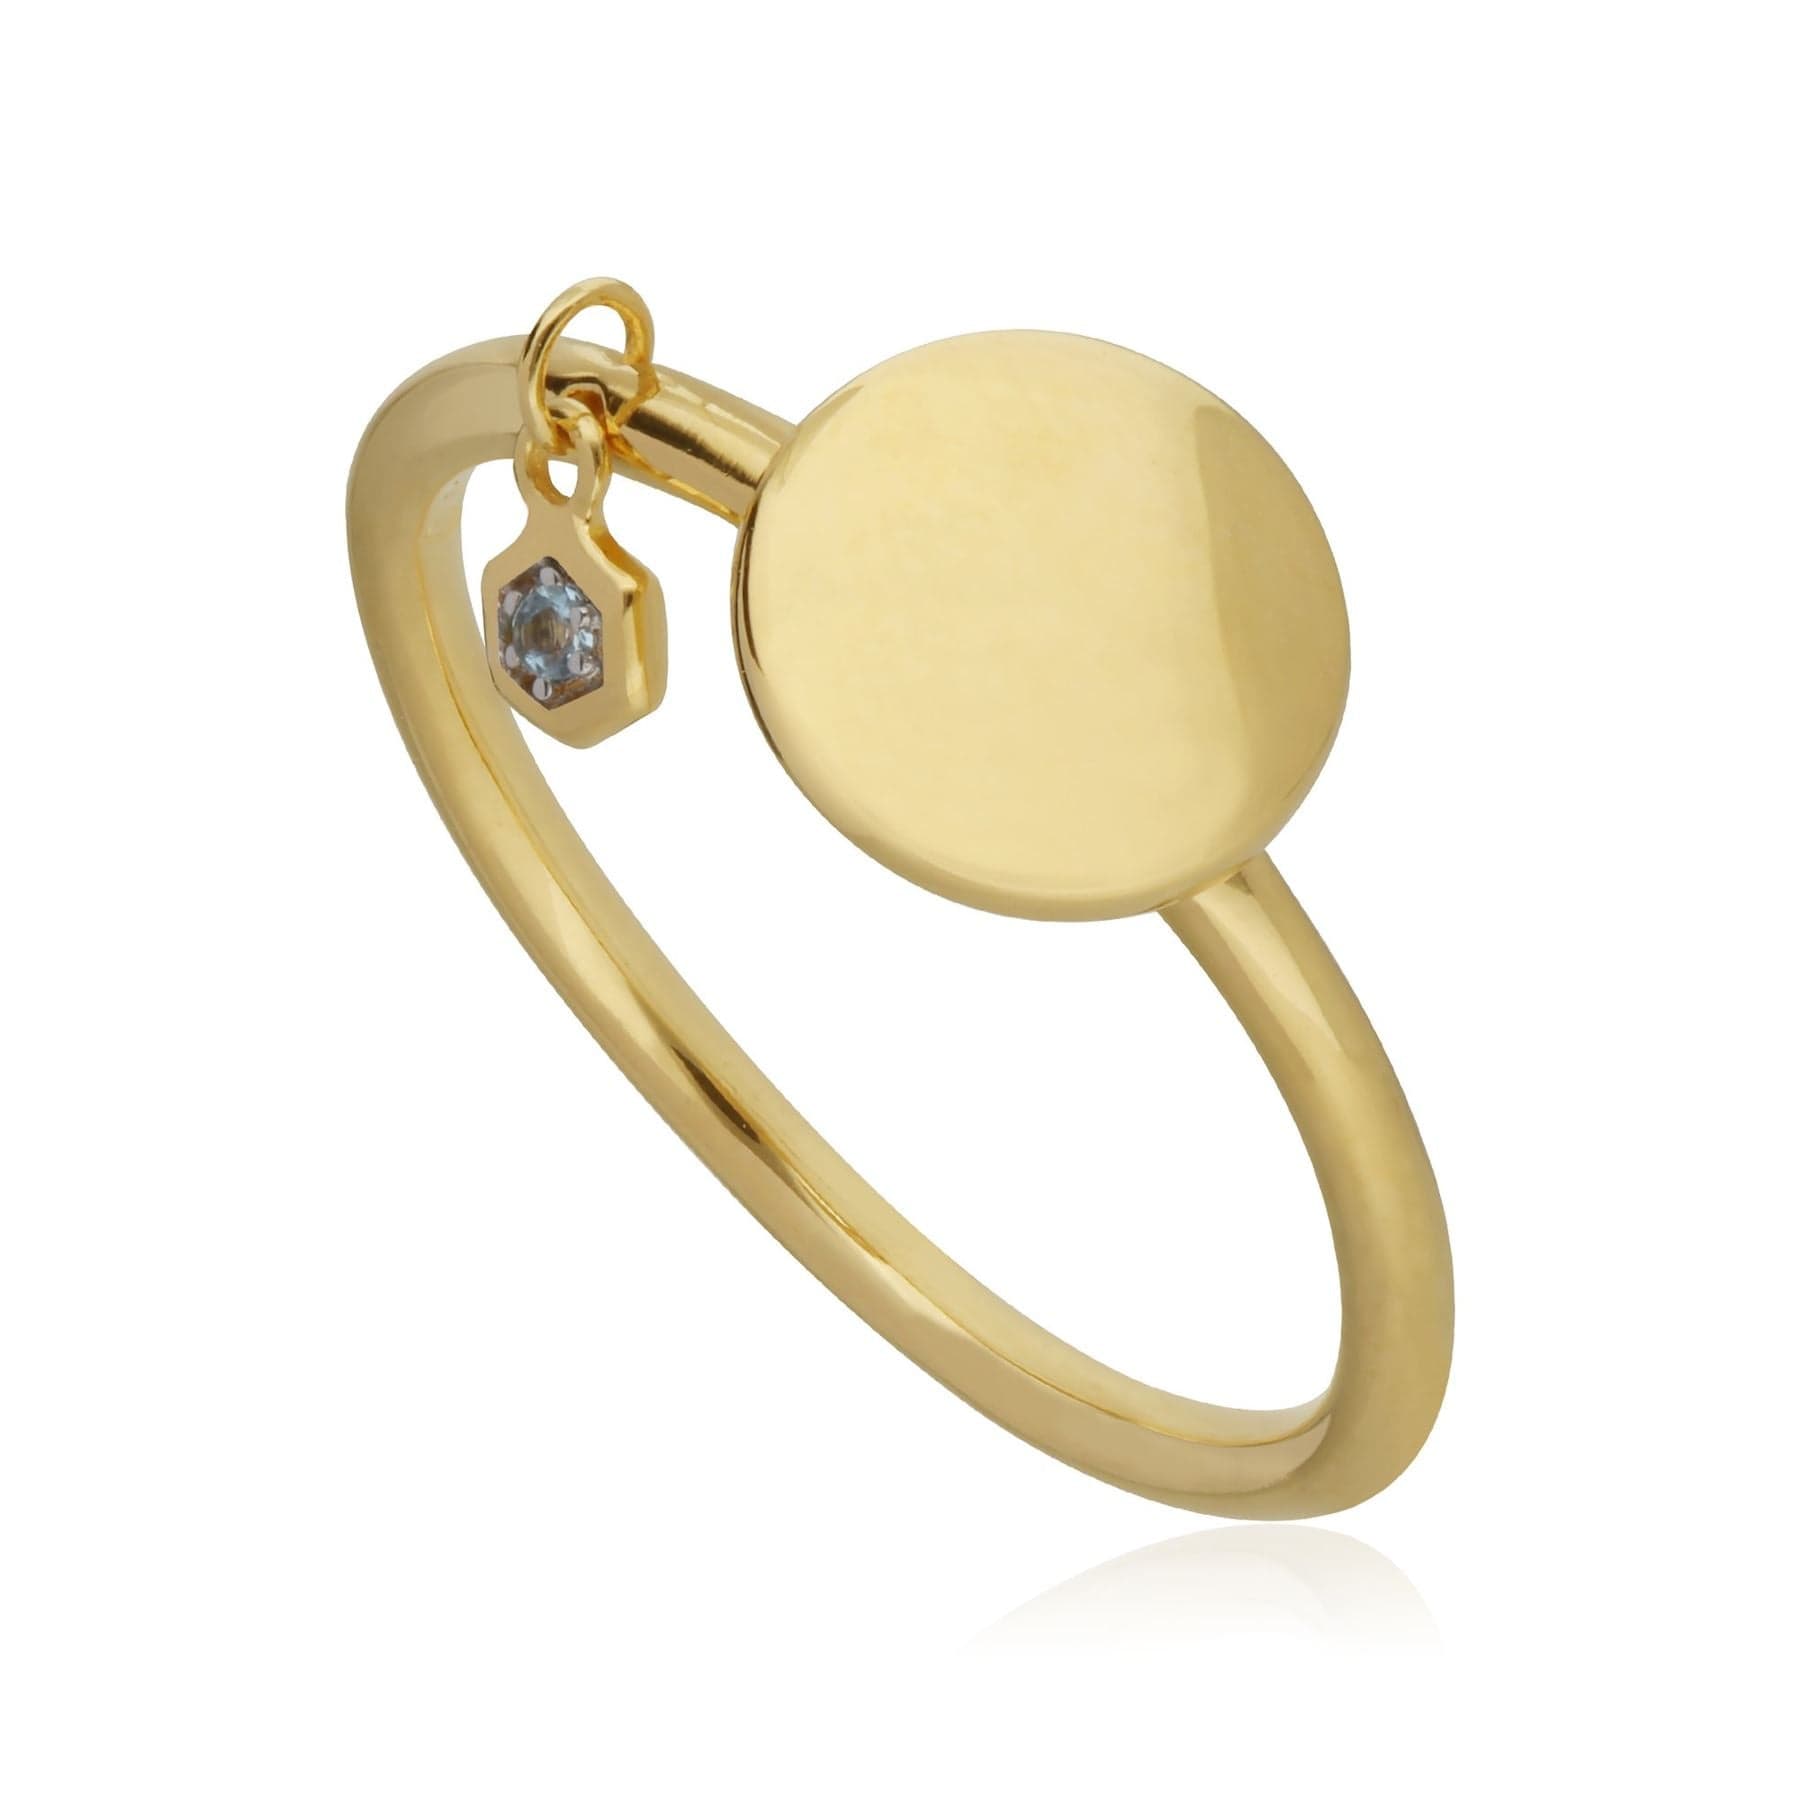 Topaz Engravable Ring in Yellow Gold Plated Sterling Silver - Gemondo